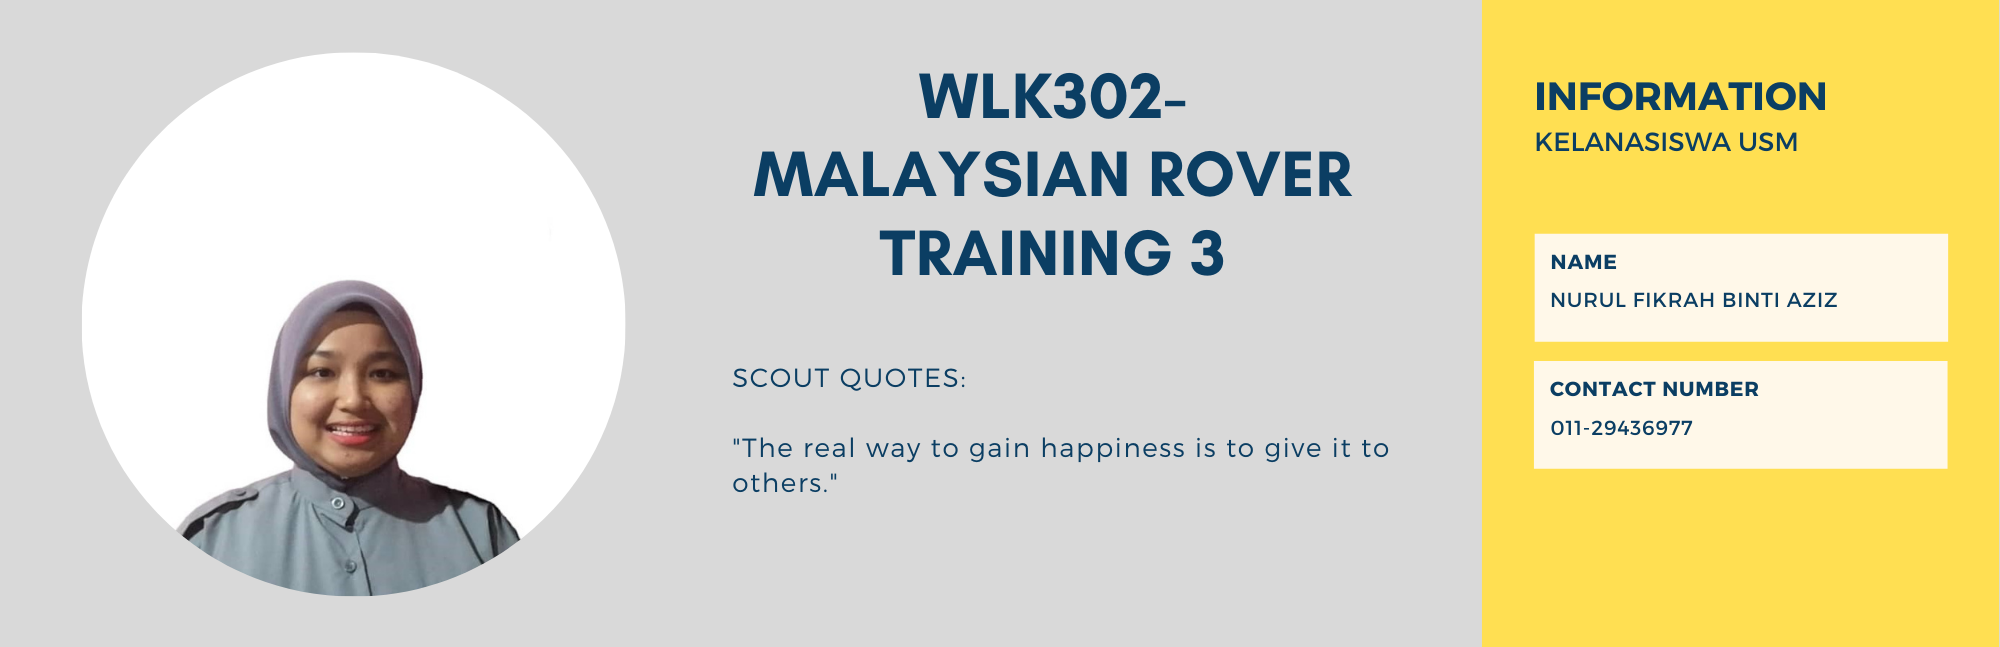 WLK302- MALAYSIAN ROVER TRAINING 3.png